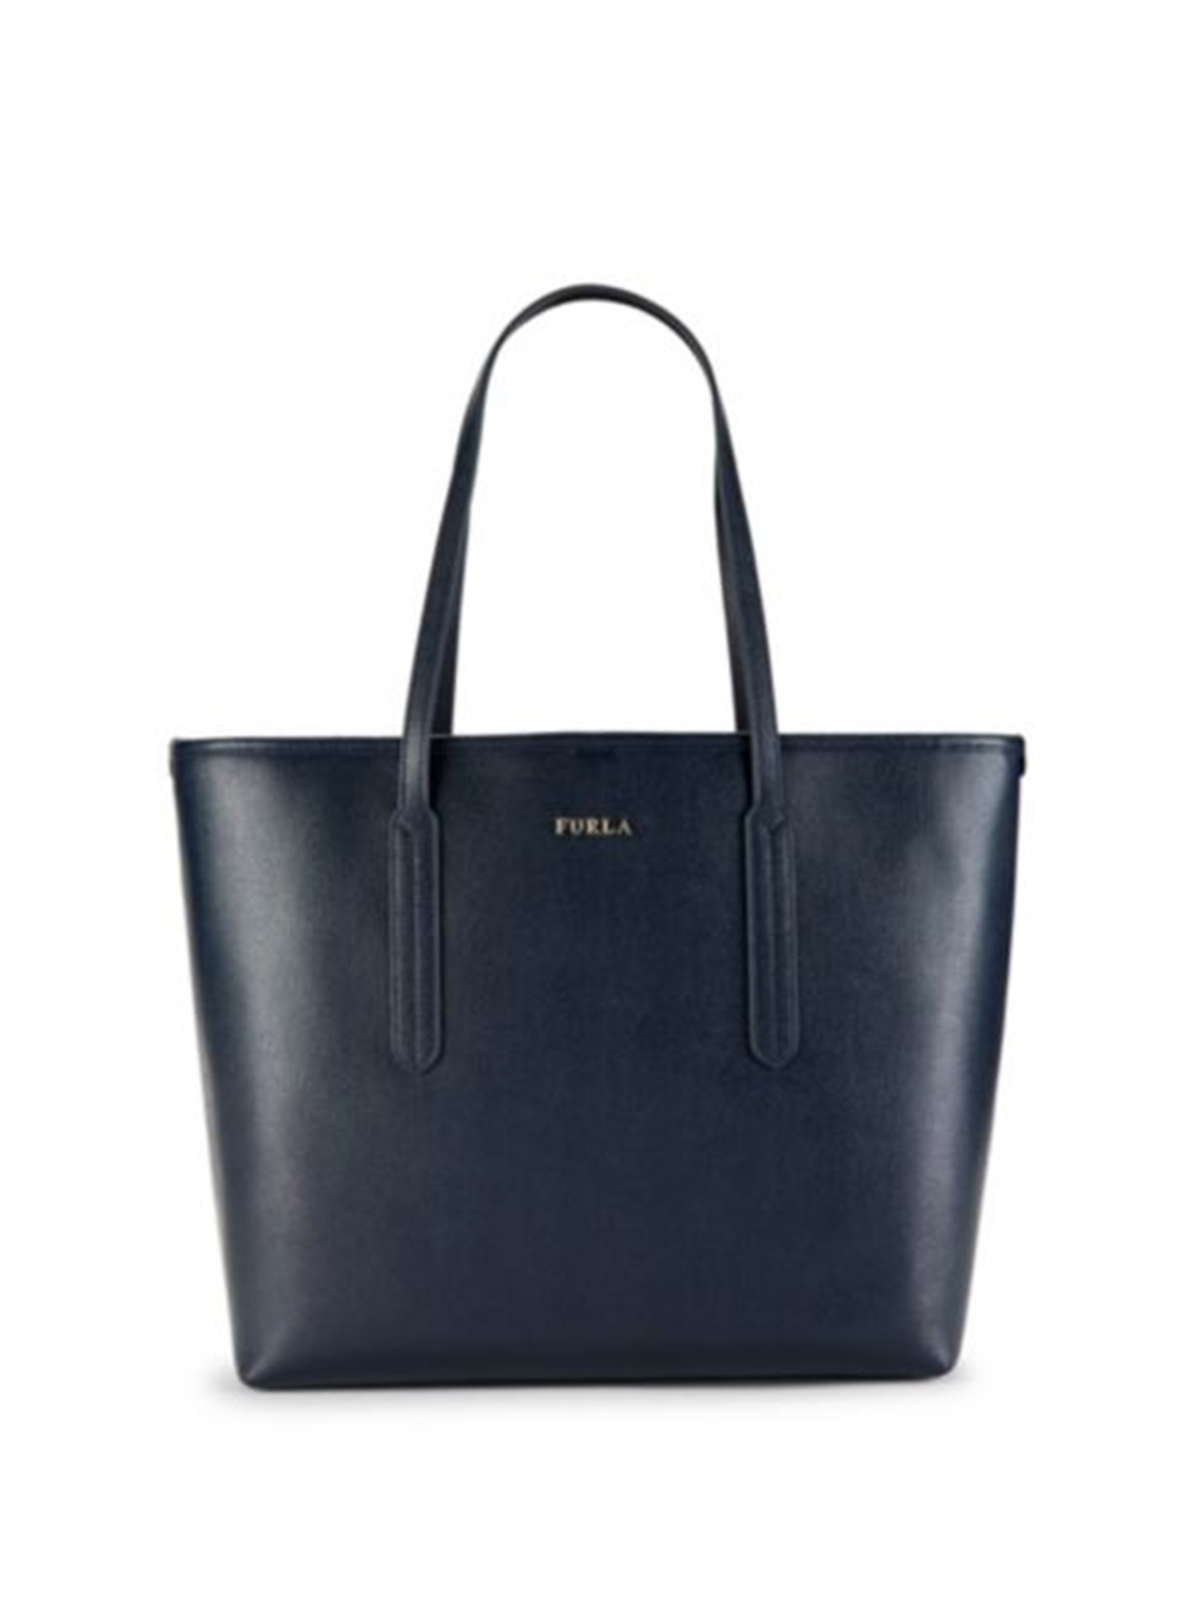 This Furla Tote Bag Is 54% Off and We Can’t Stop Freaking Out